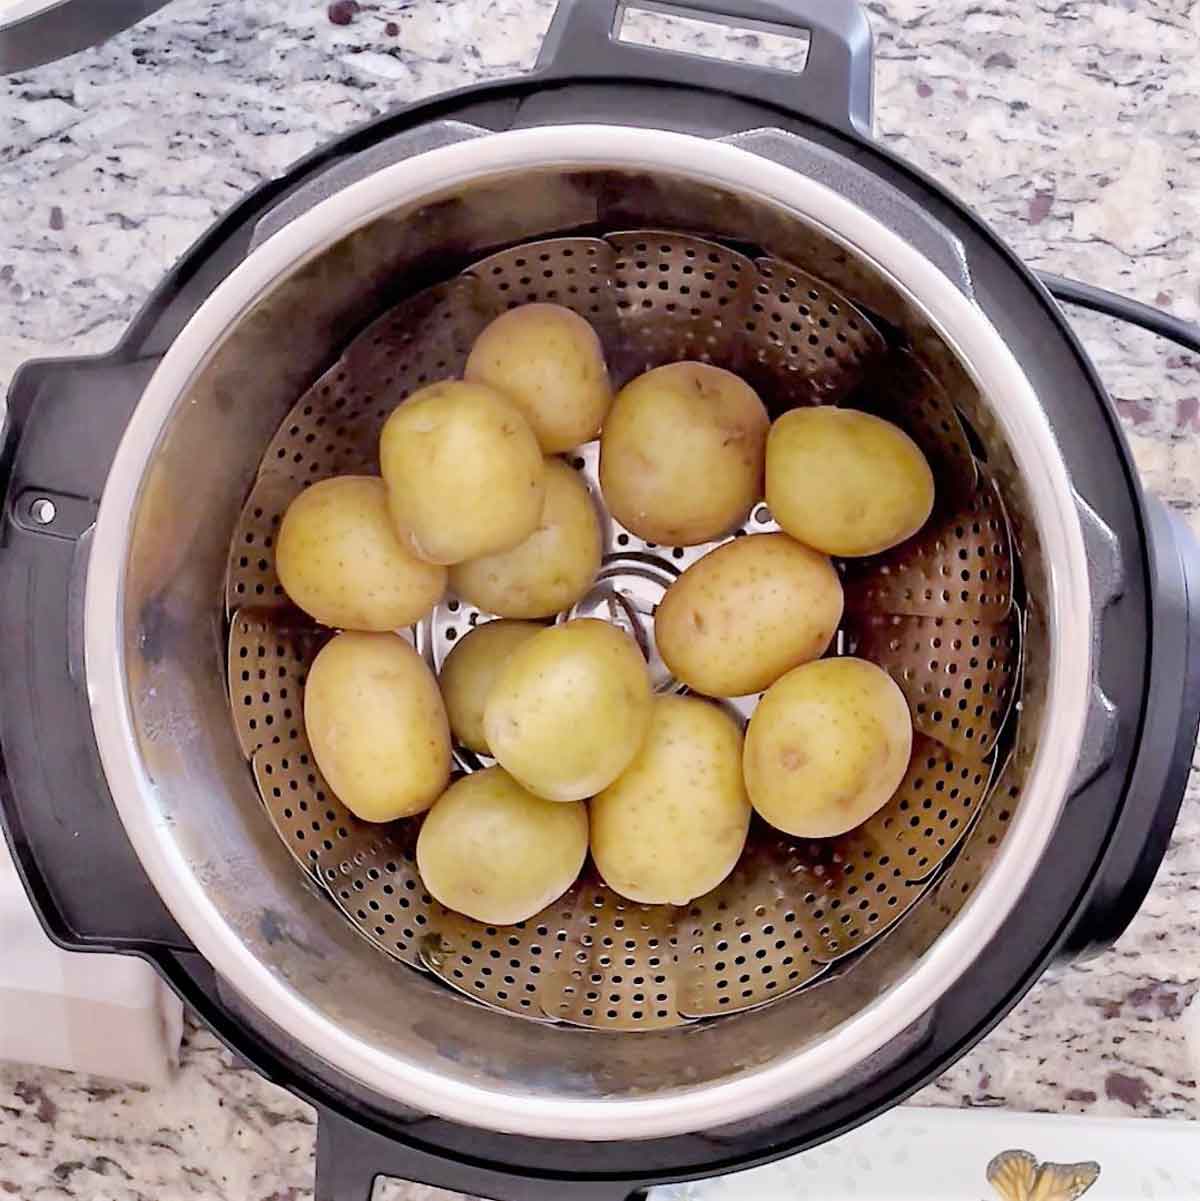 Boiled potatoes in instant pot.